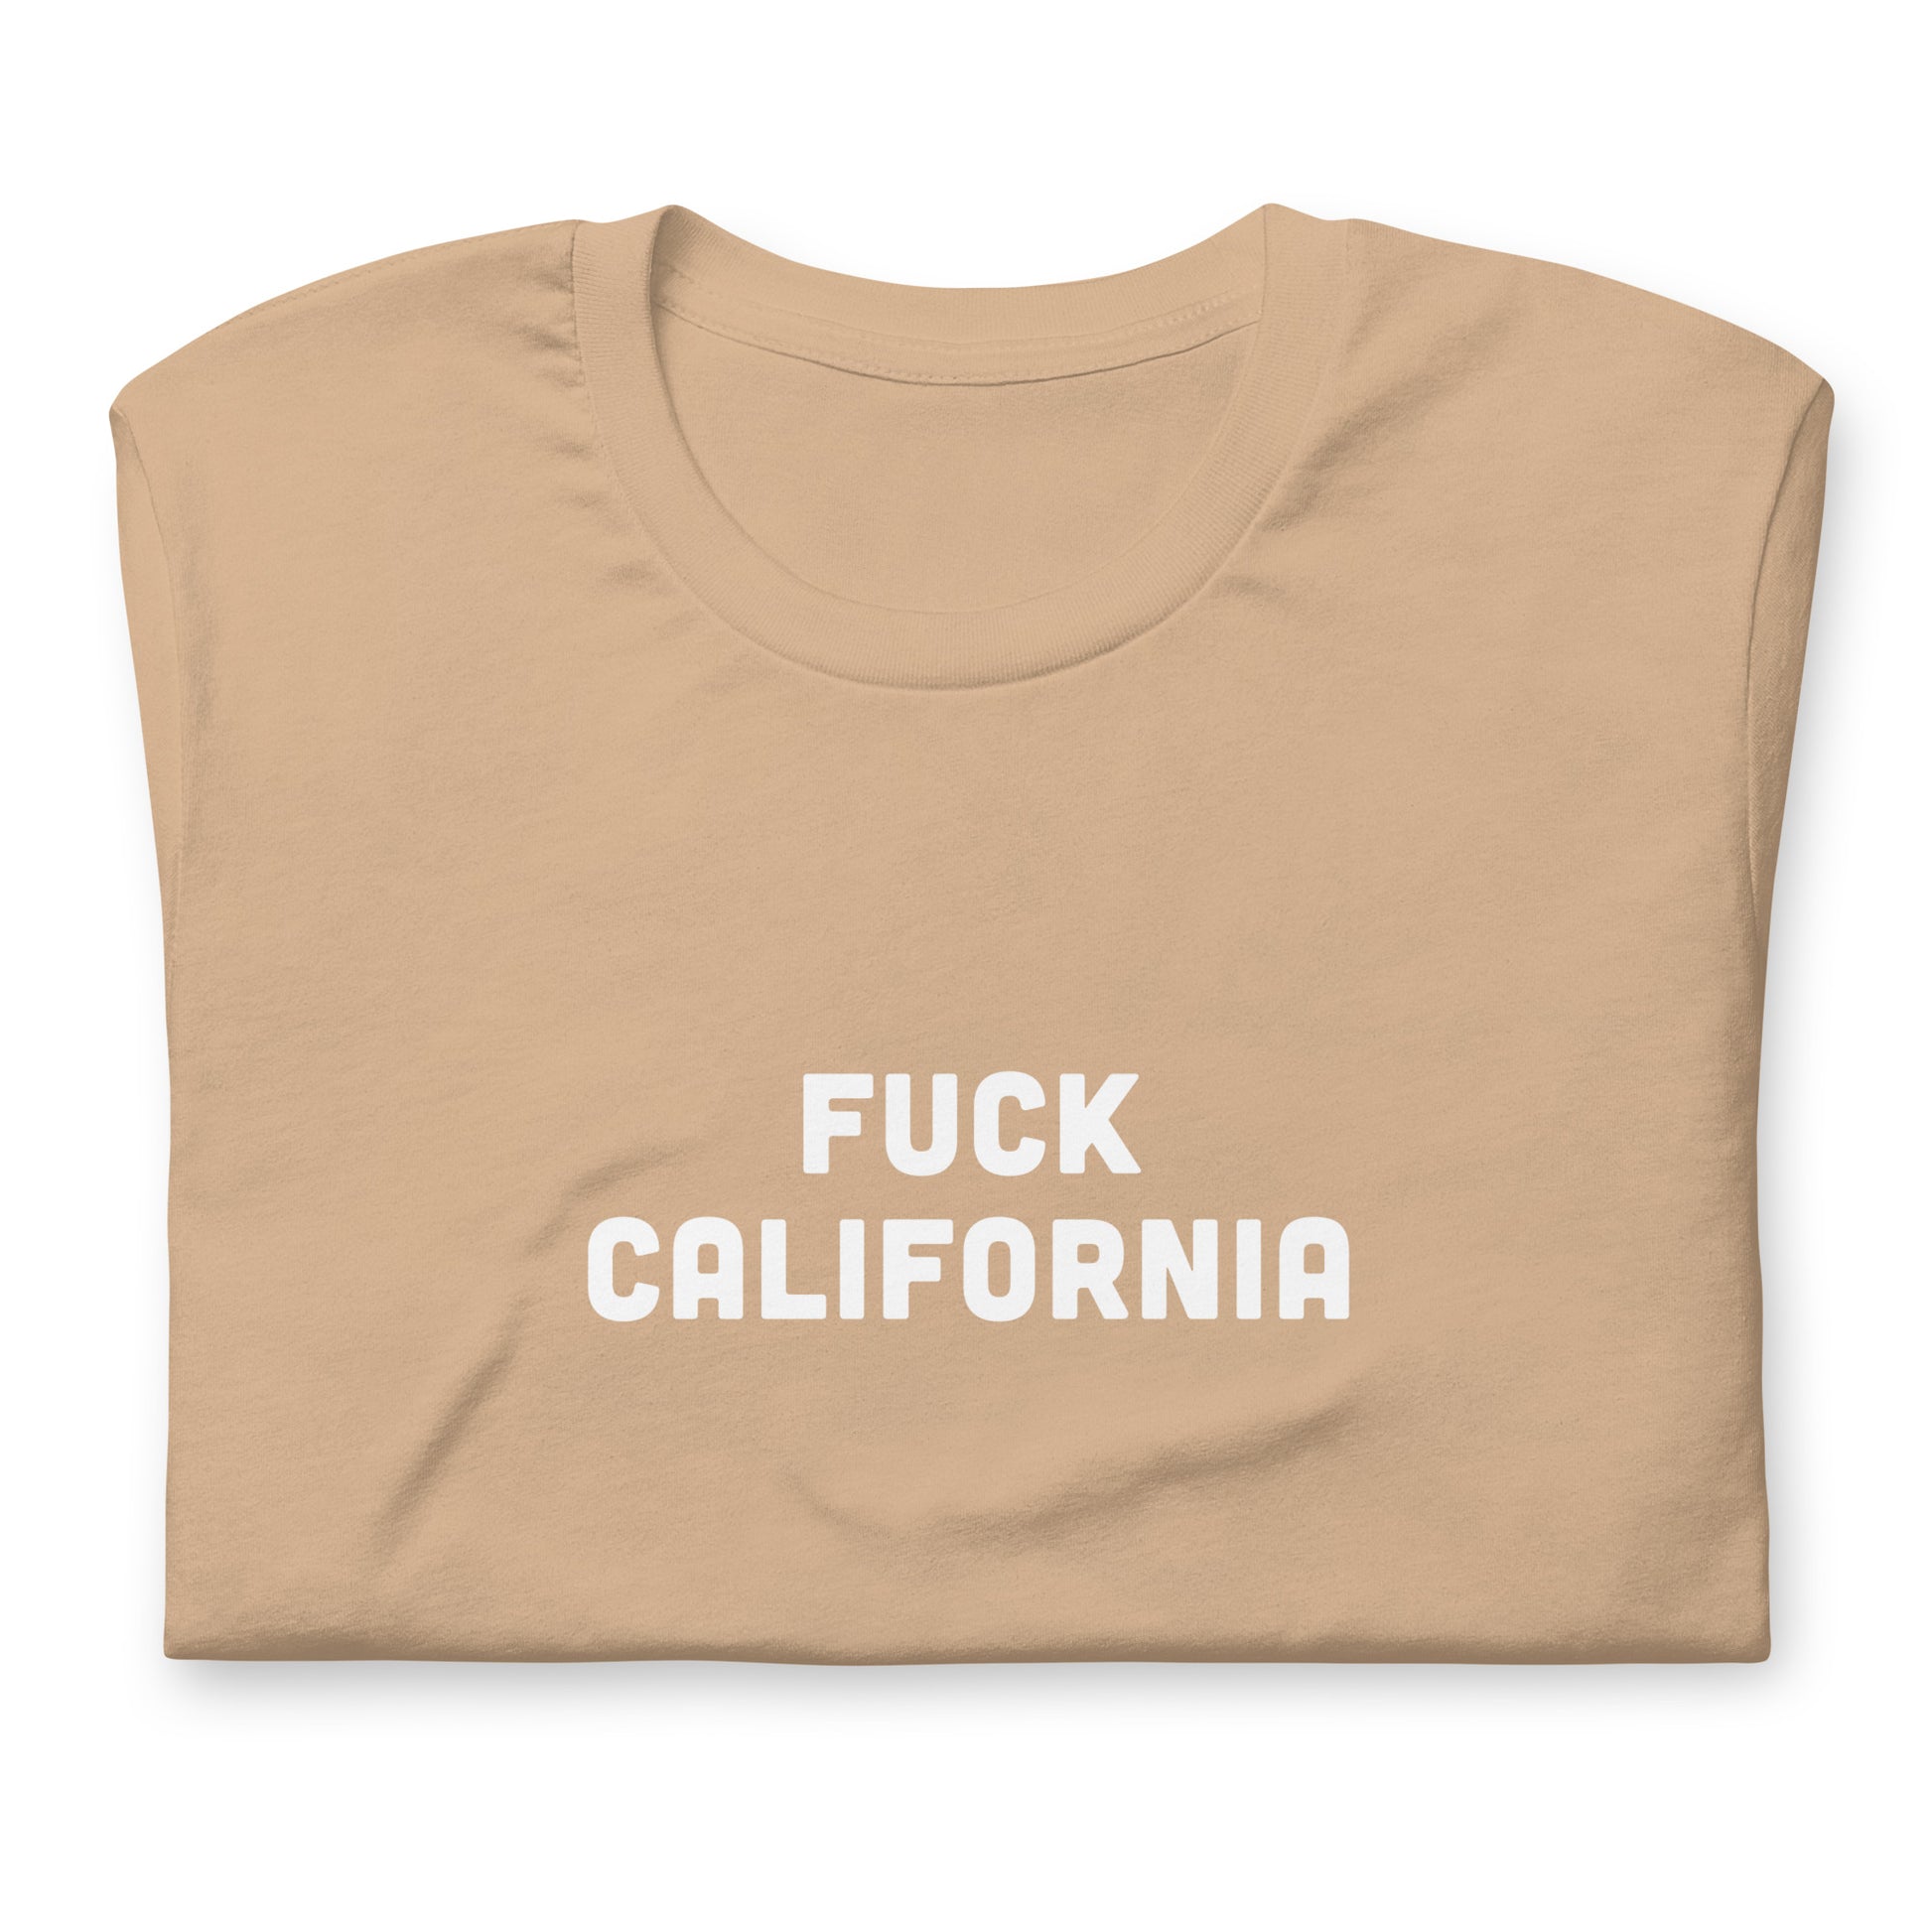 Fuck California T-Shirt Size XL Color Forest